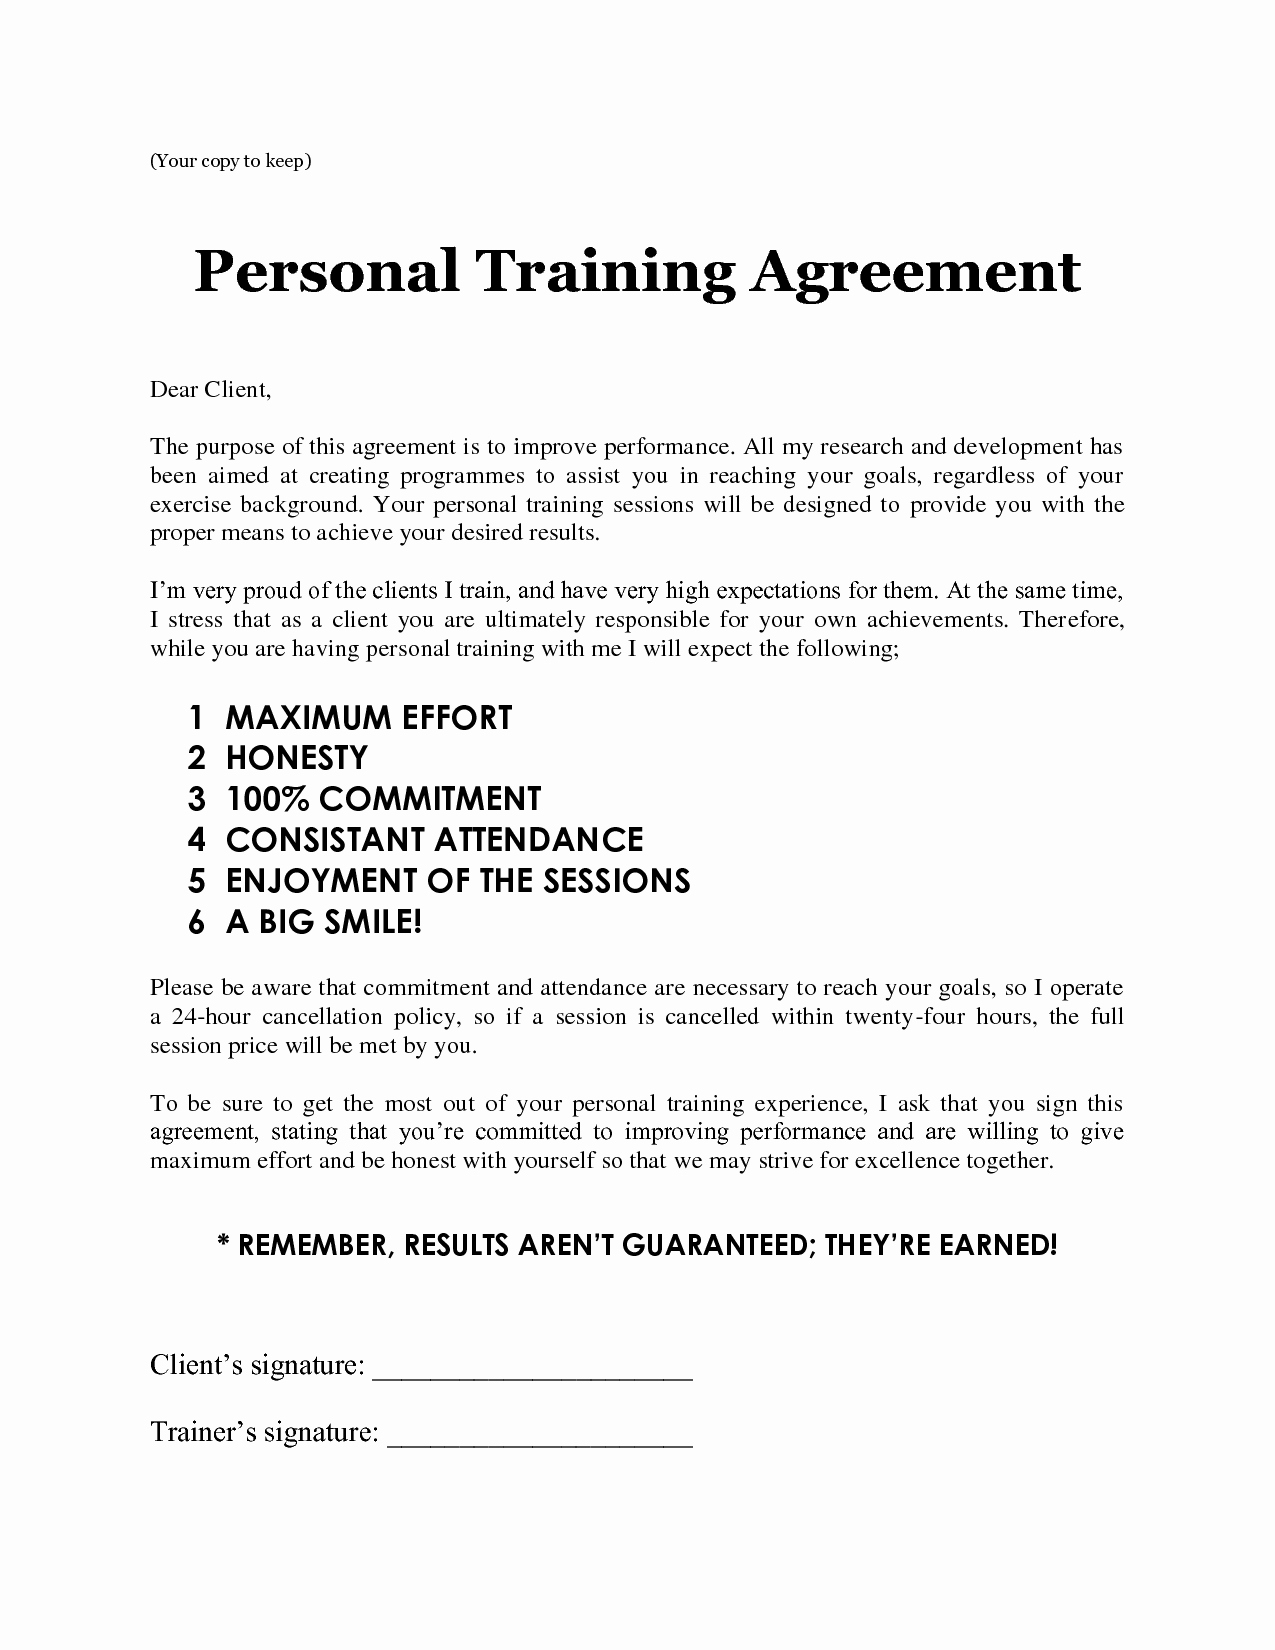 Personal Agreement Template 011 Template Ideas Download Client Agreement Form Personal Training